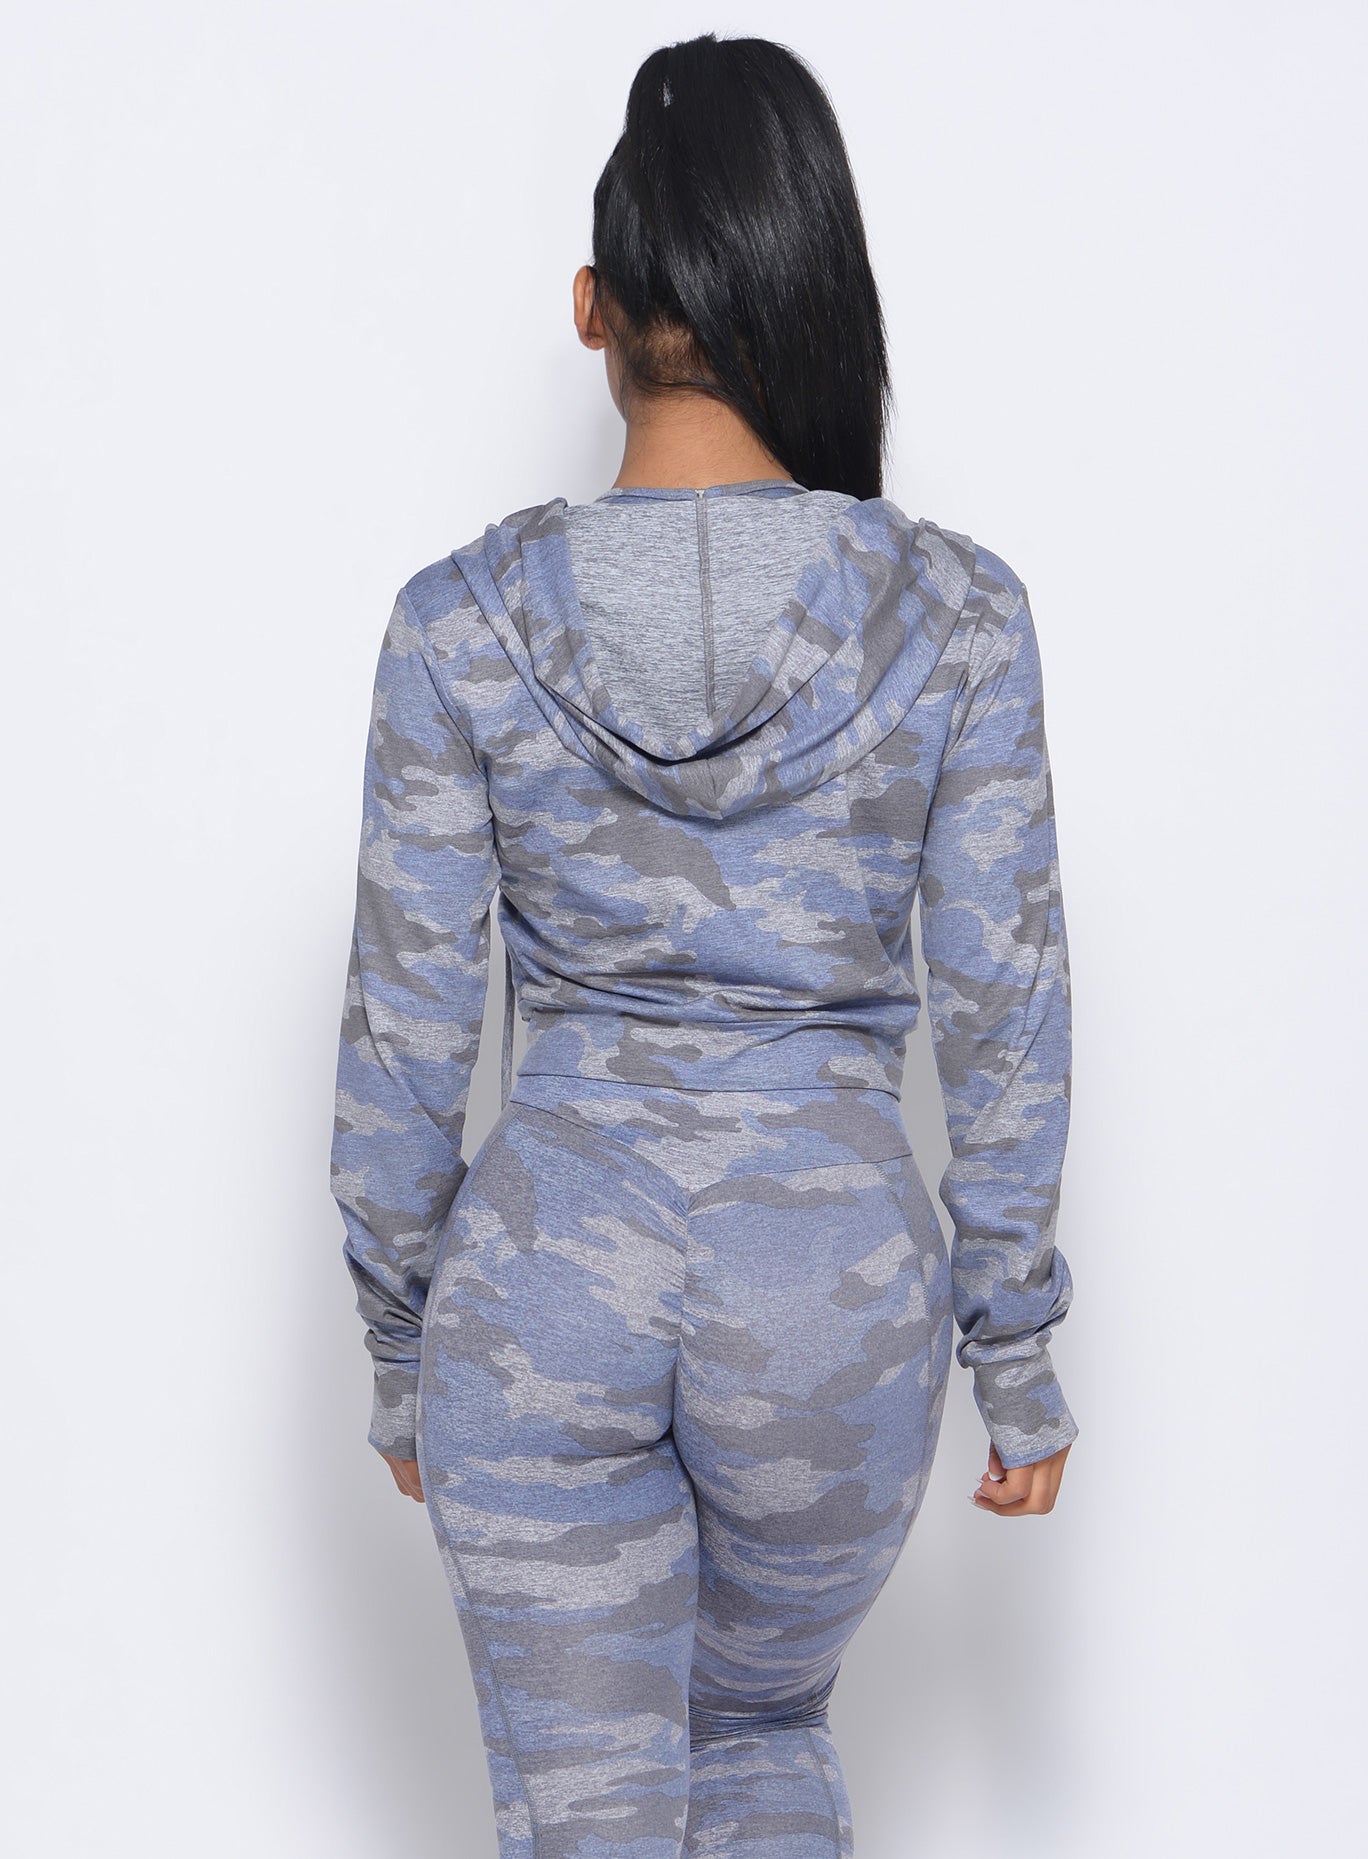 back profile view of the model wearing our silver camo signature jacket and a matching leggings